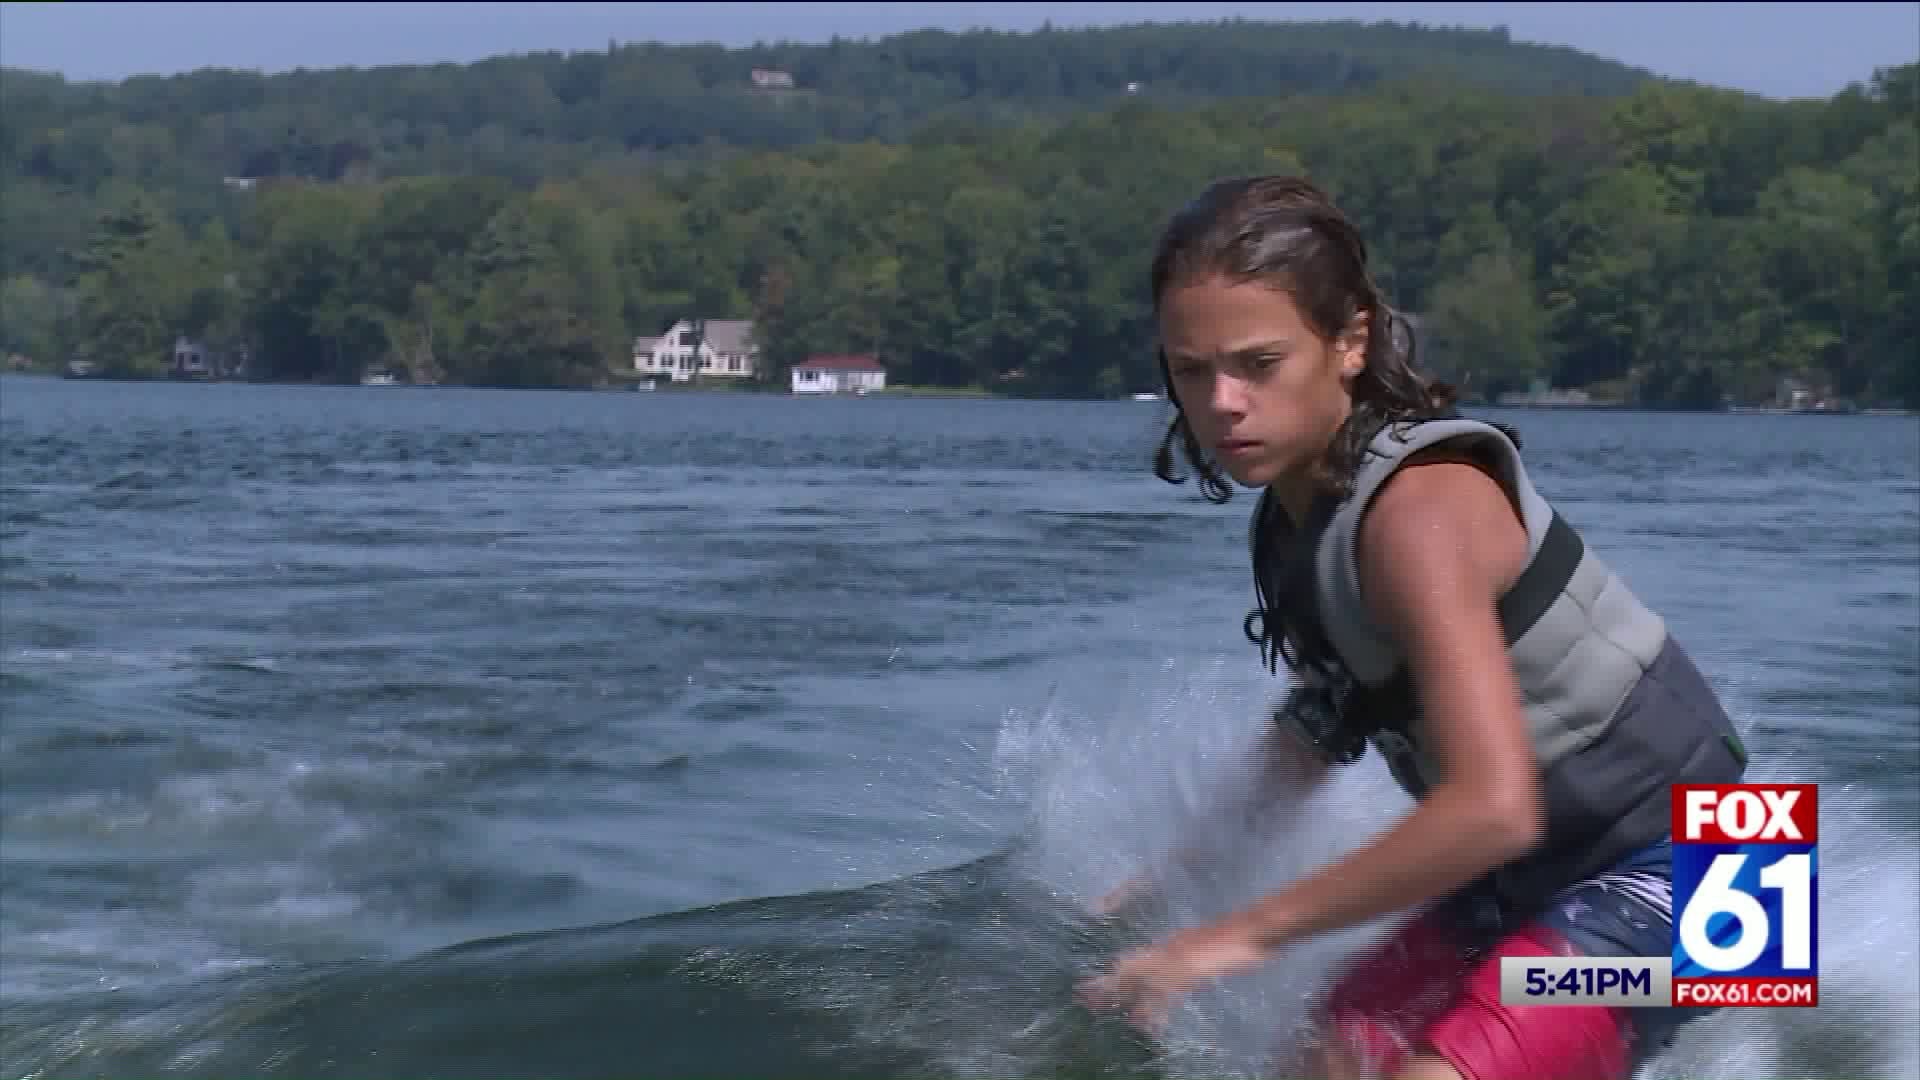 A wunderkind in the sport of Wake Surfing, 75 pounds soaking wet